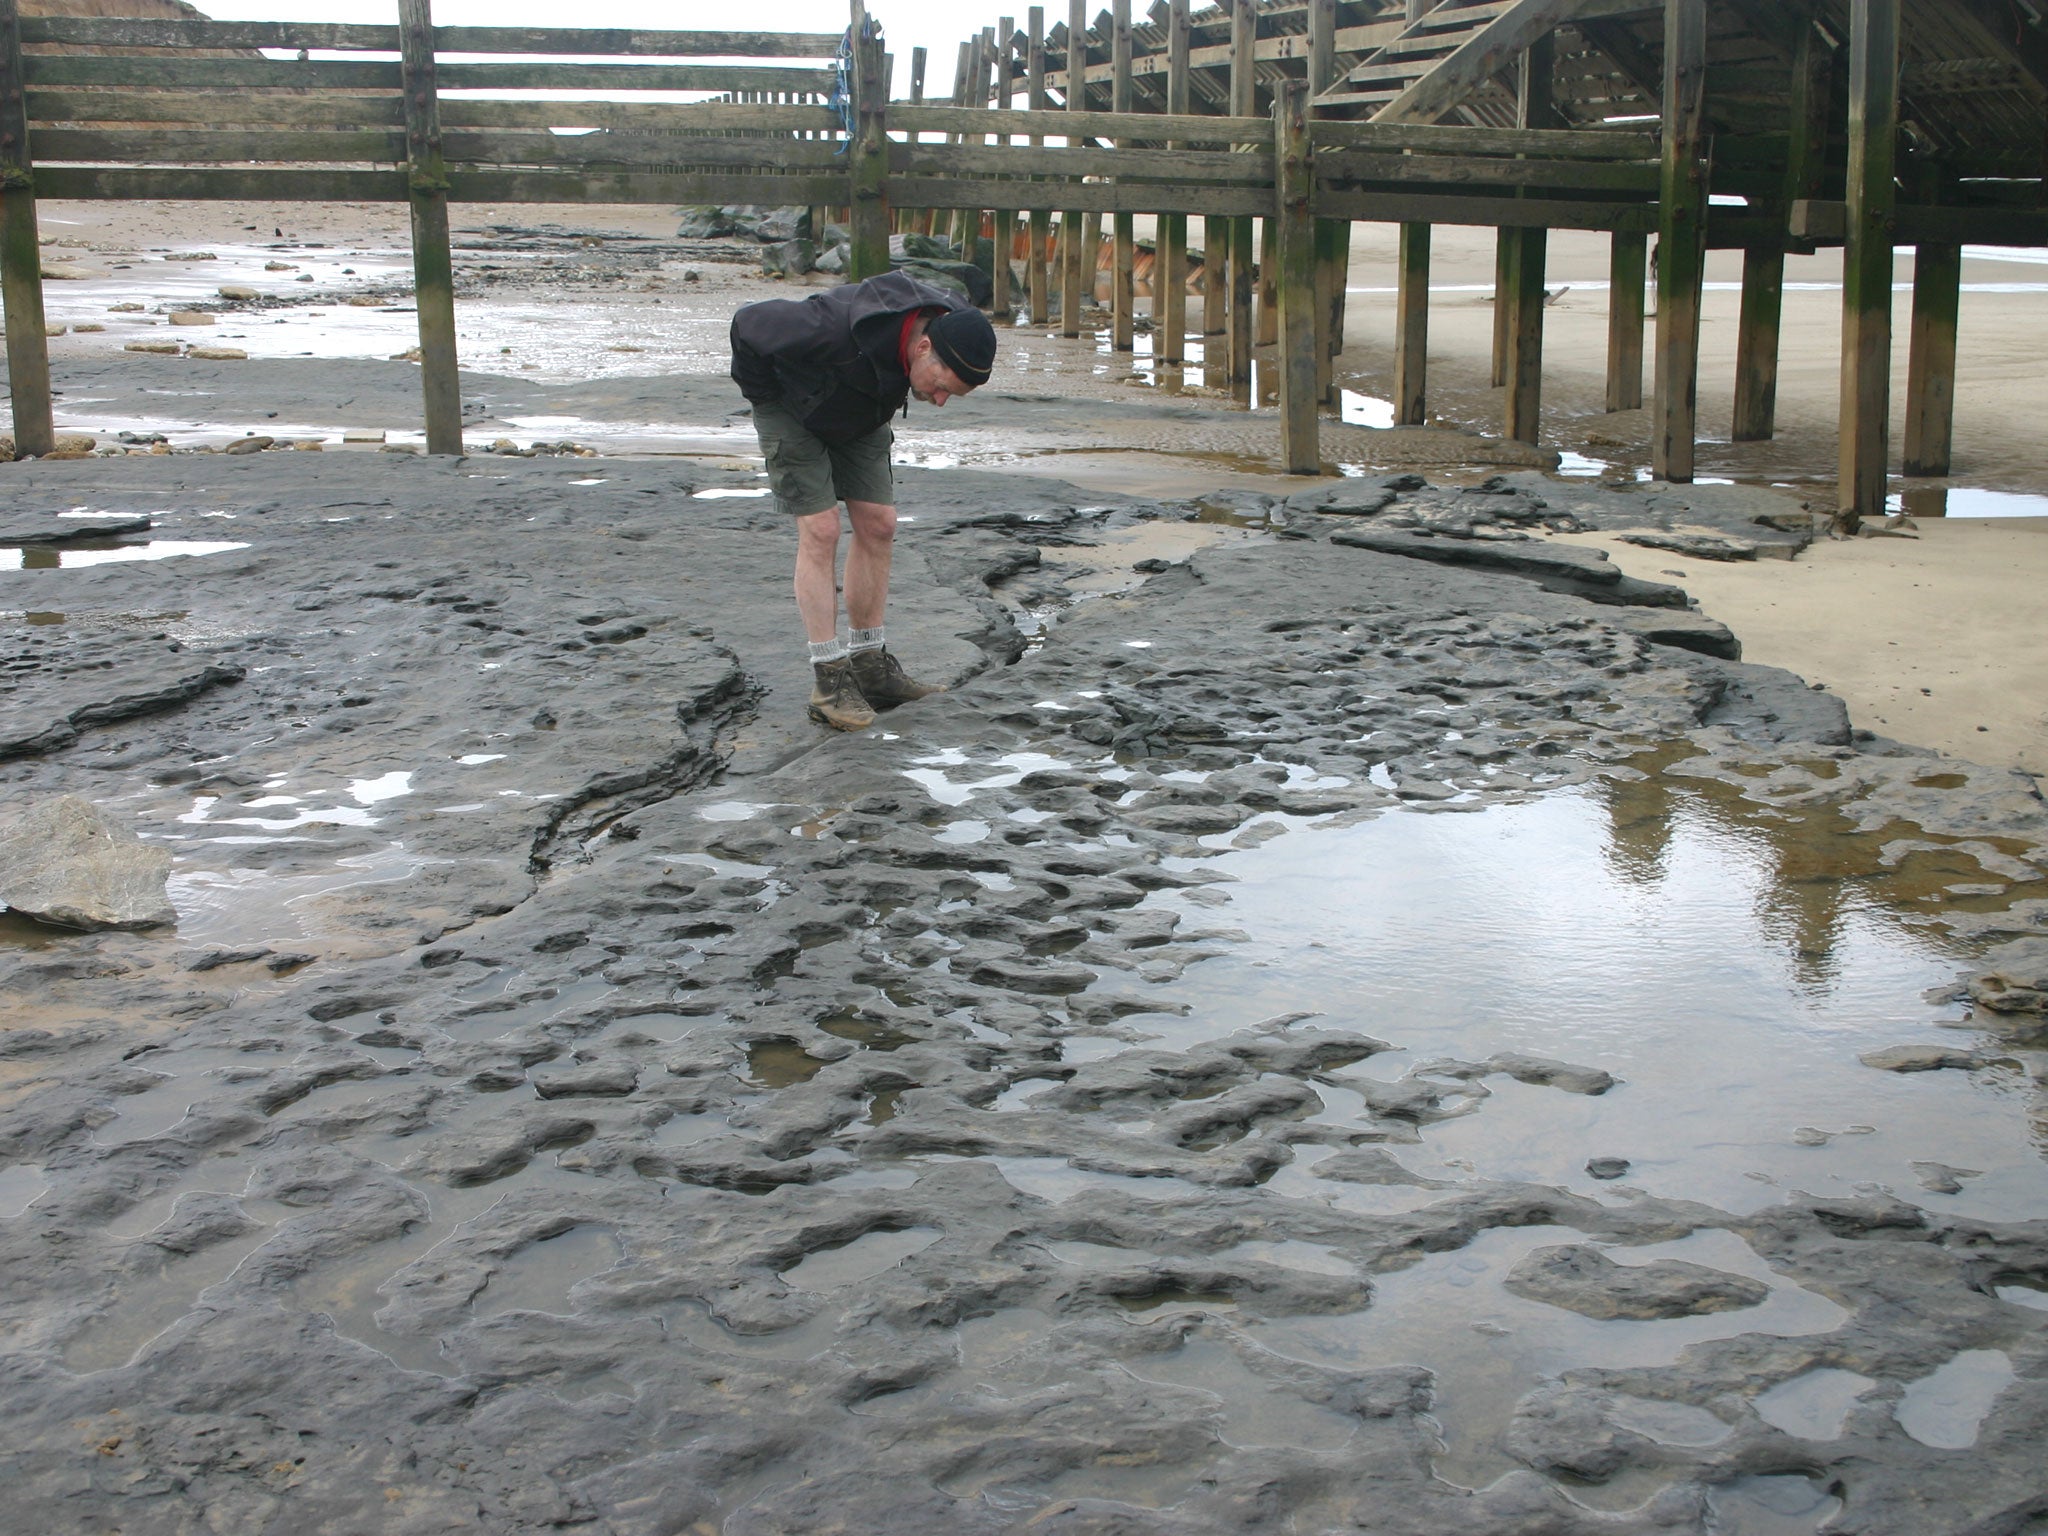 Photograph of the footprint hollows in situ on the beach as Happisburgh, Norfolk